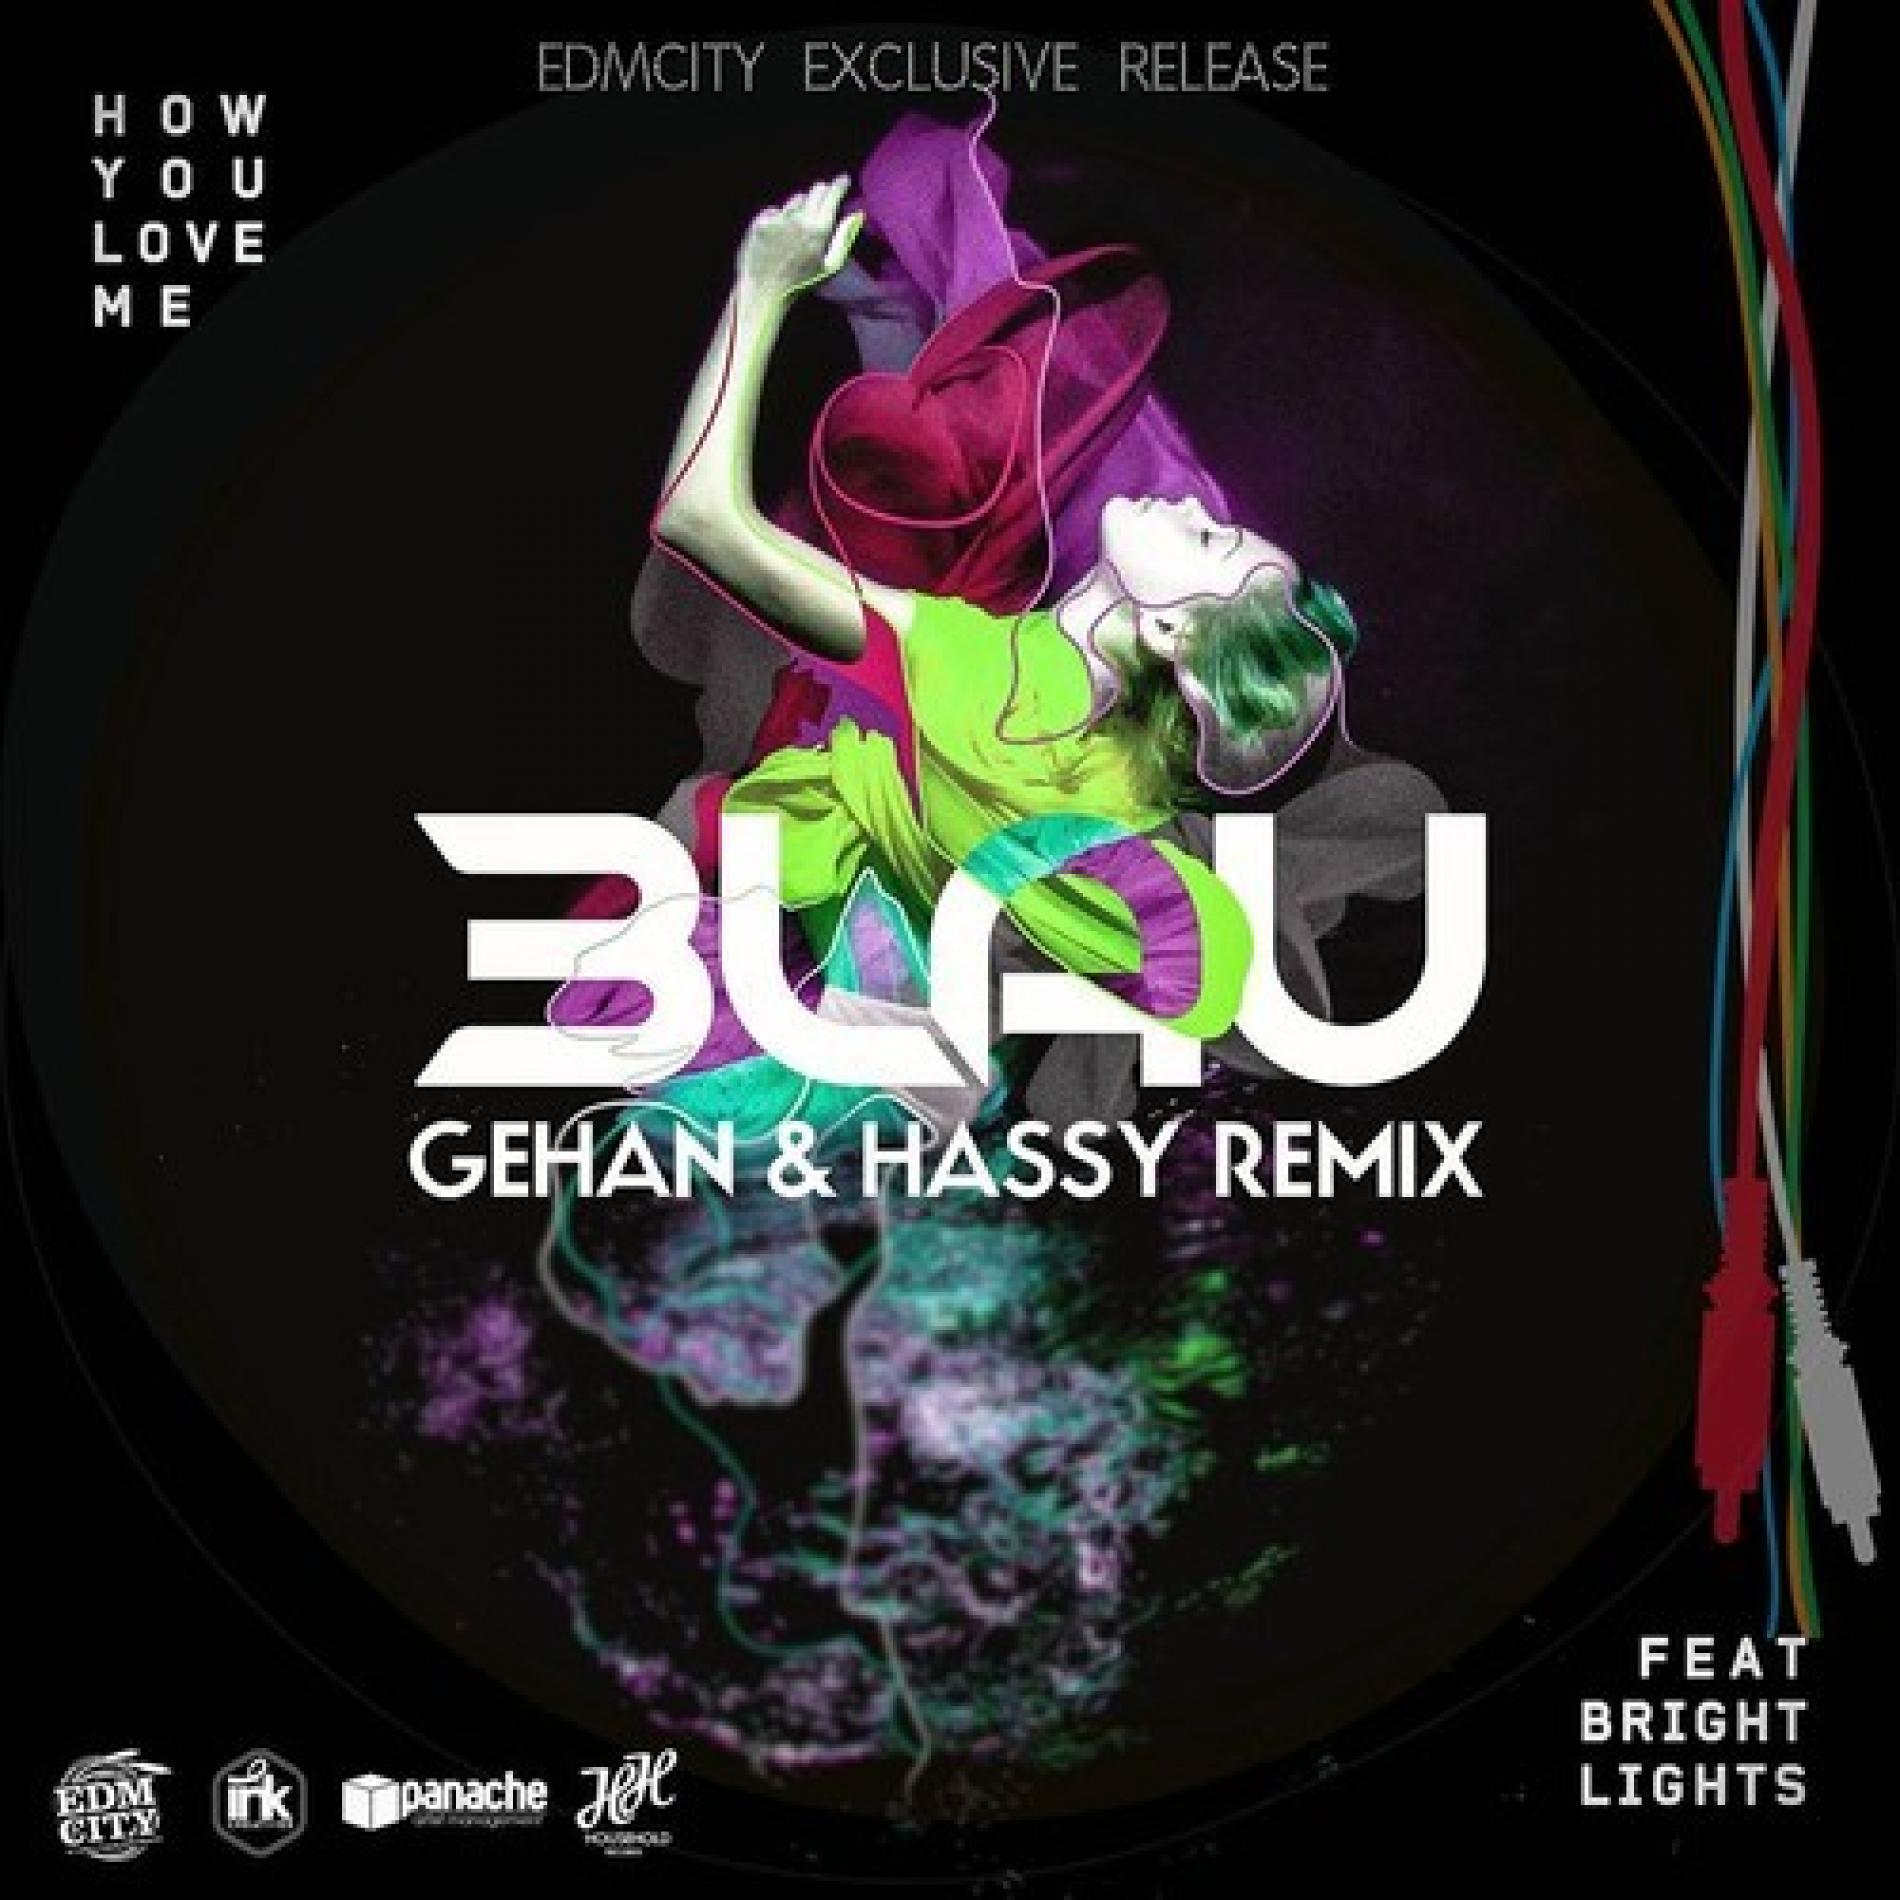 Gehan & Hassy – 3LAU – How You Love Me Feat. Bright Lights (Remix)